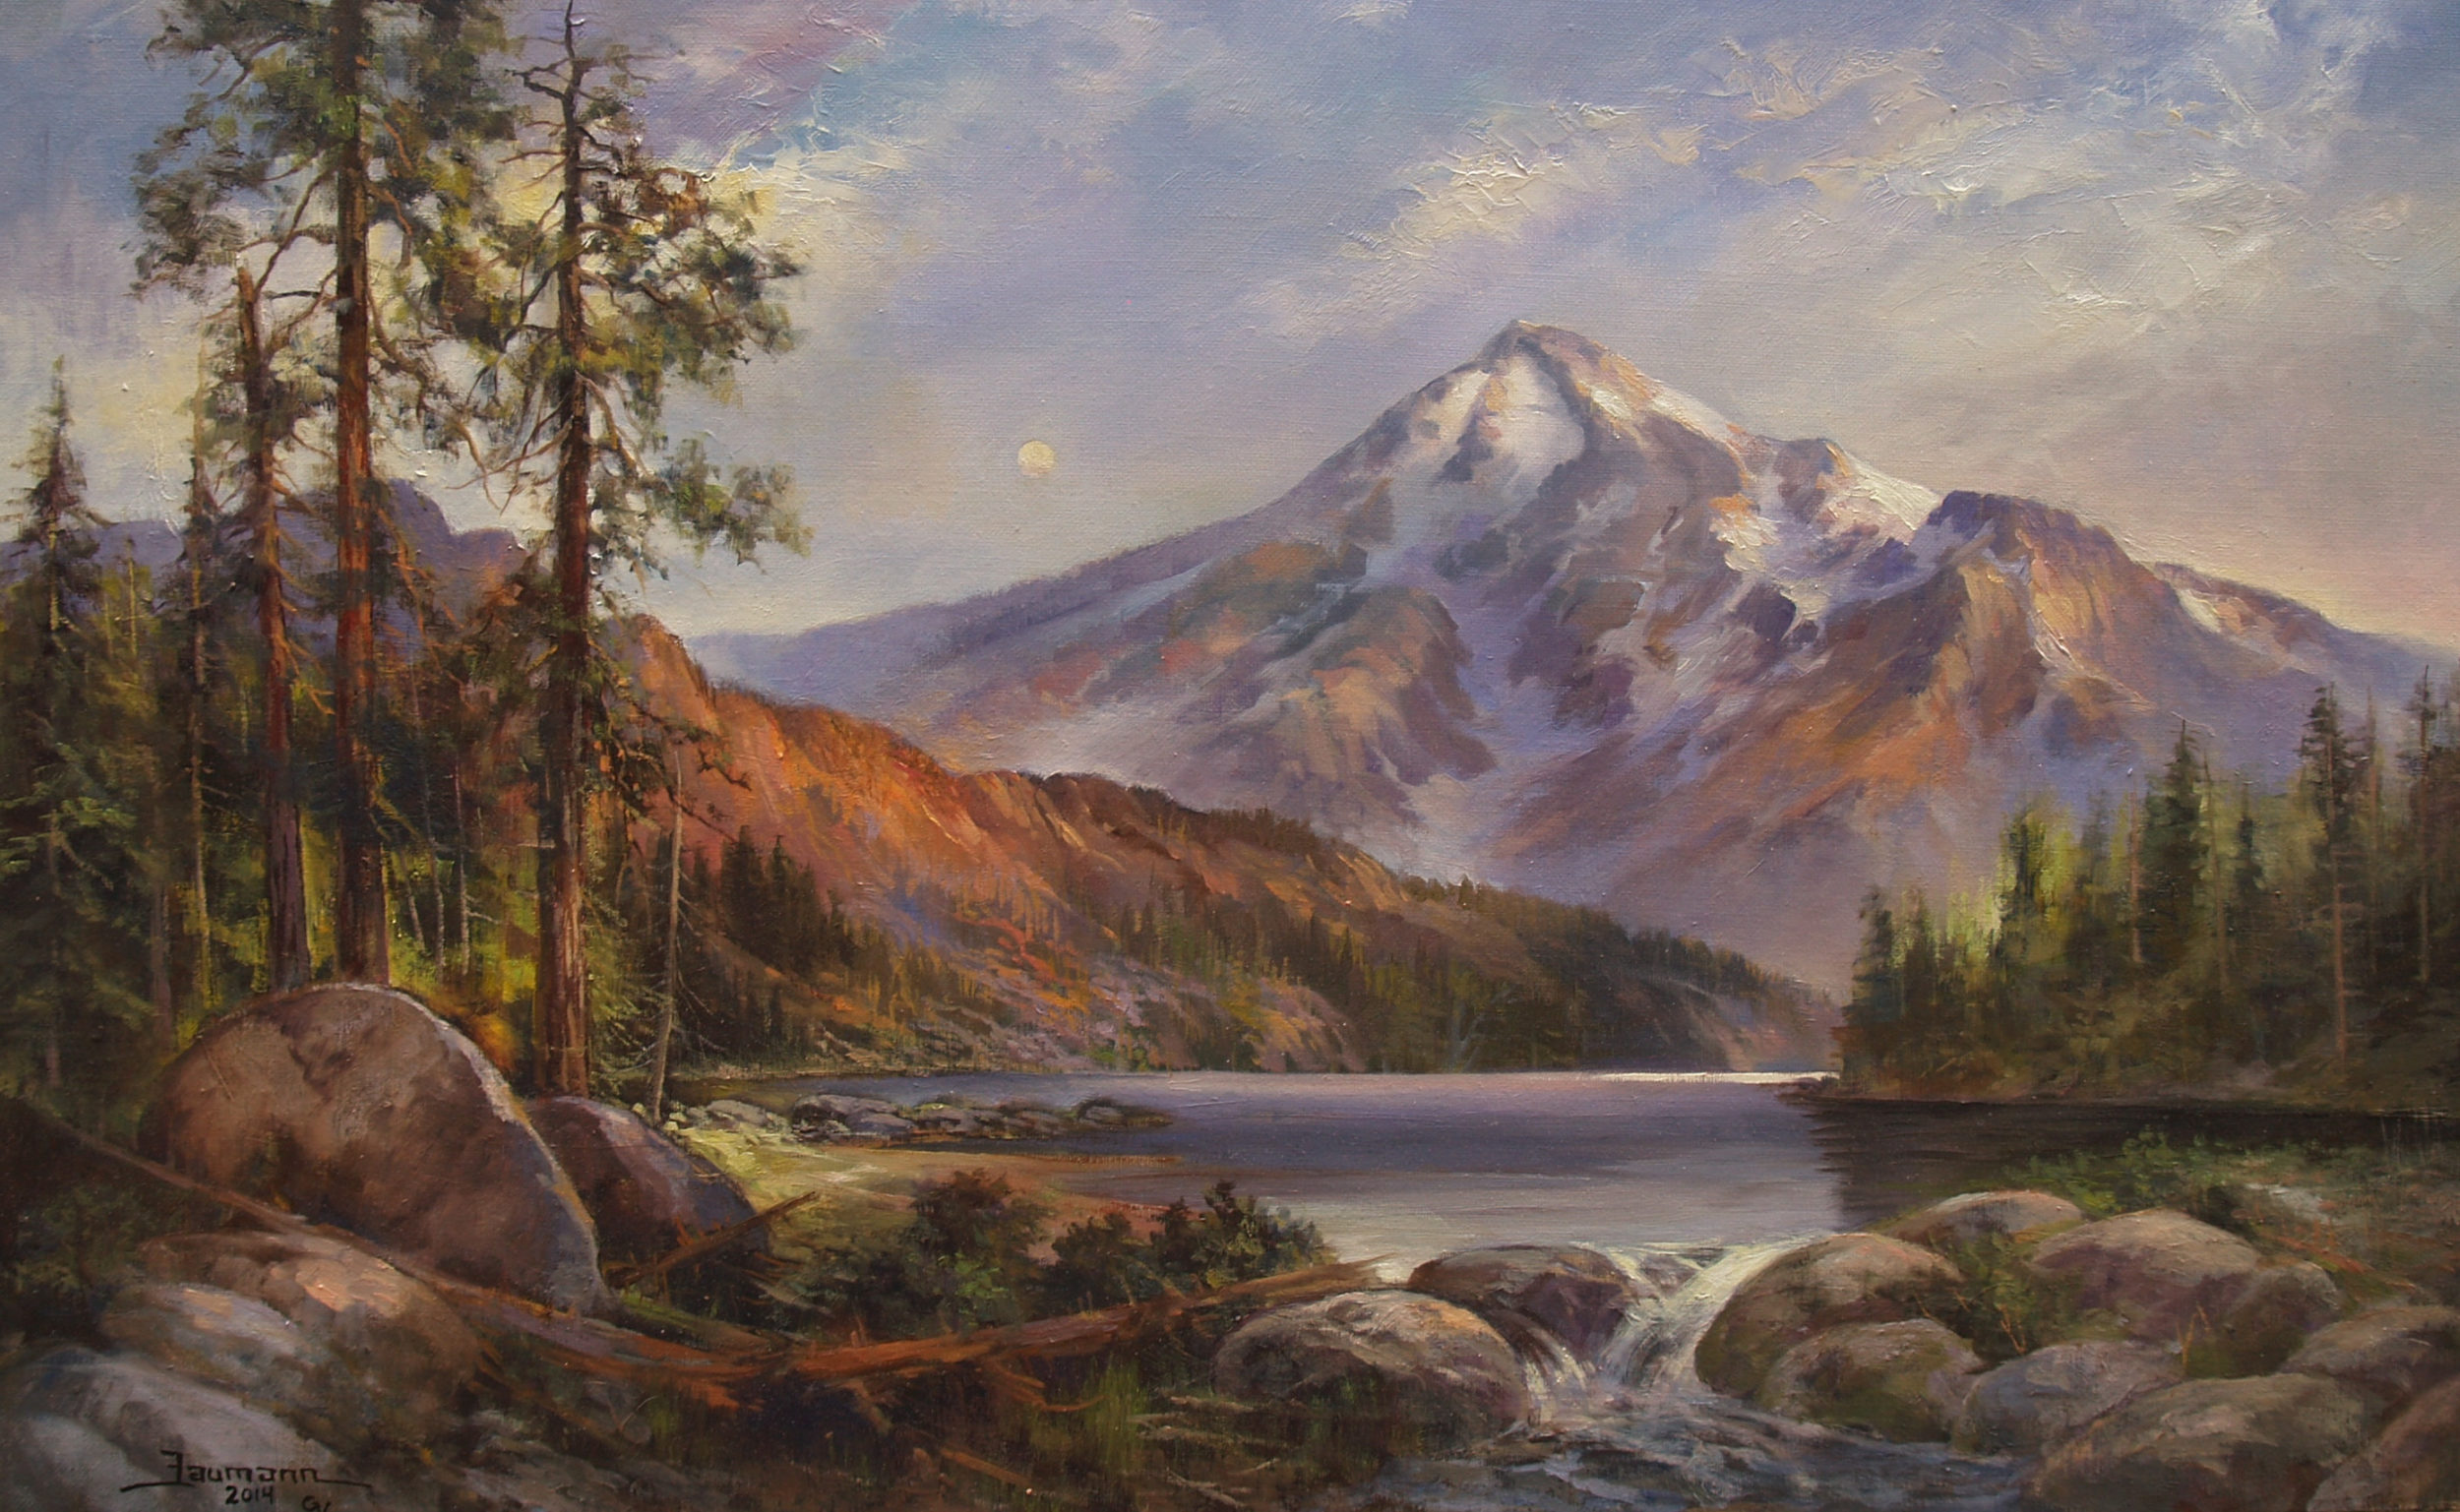 This is a painting of Mt. Shasta called Illusion of Grandeus by Stefan Baumann and a near-by lake that illustrates the magnificence and beauty of the volcanic mountain.